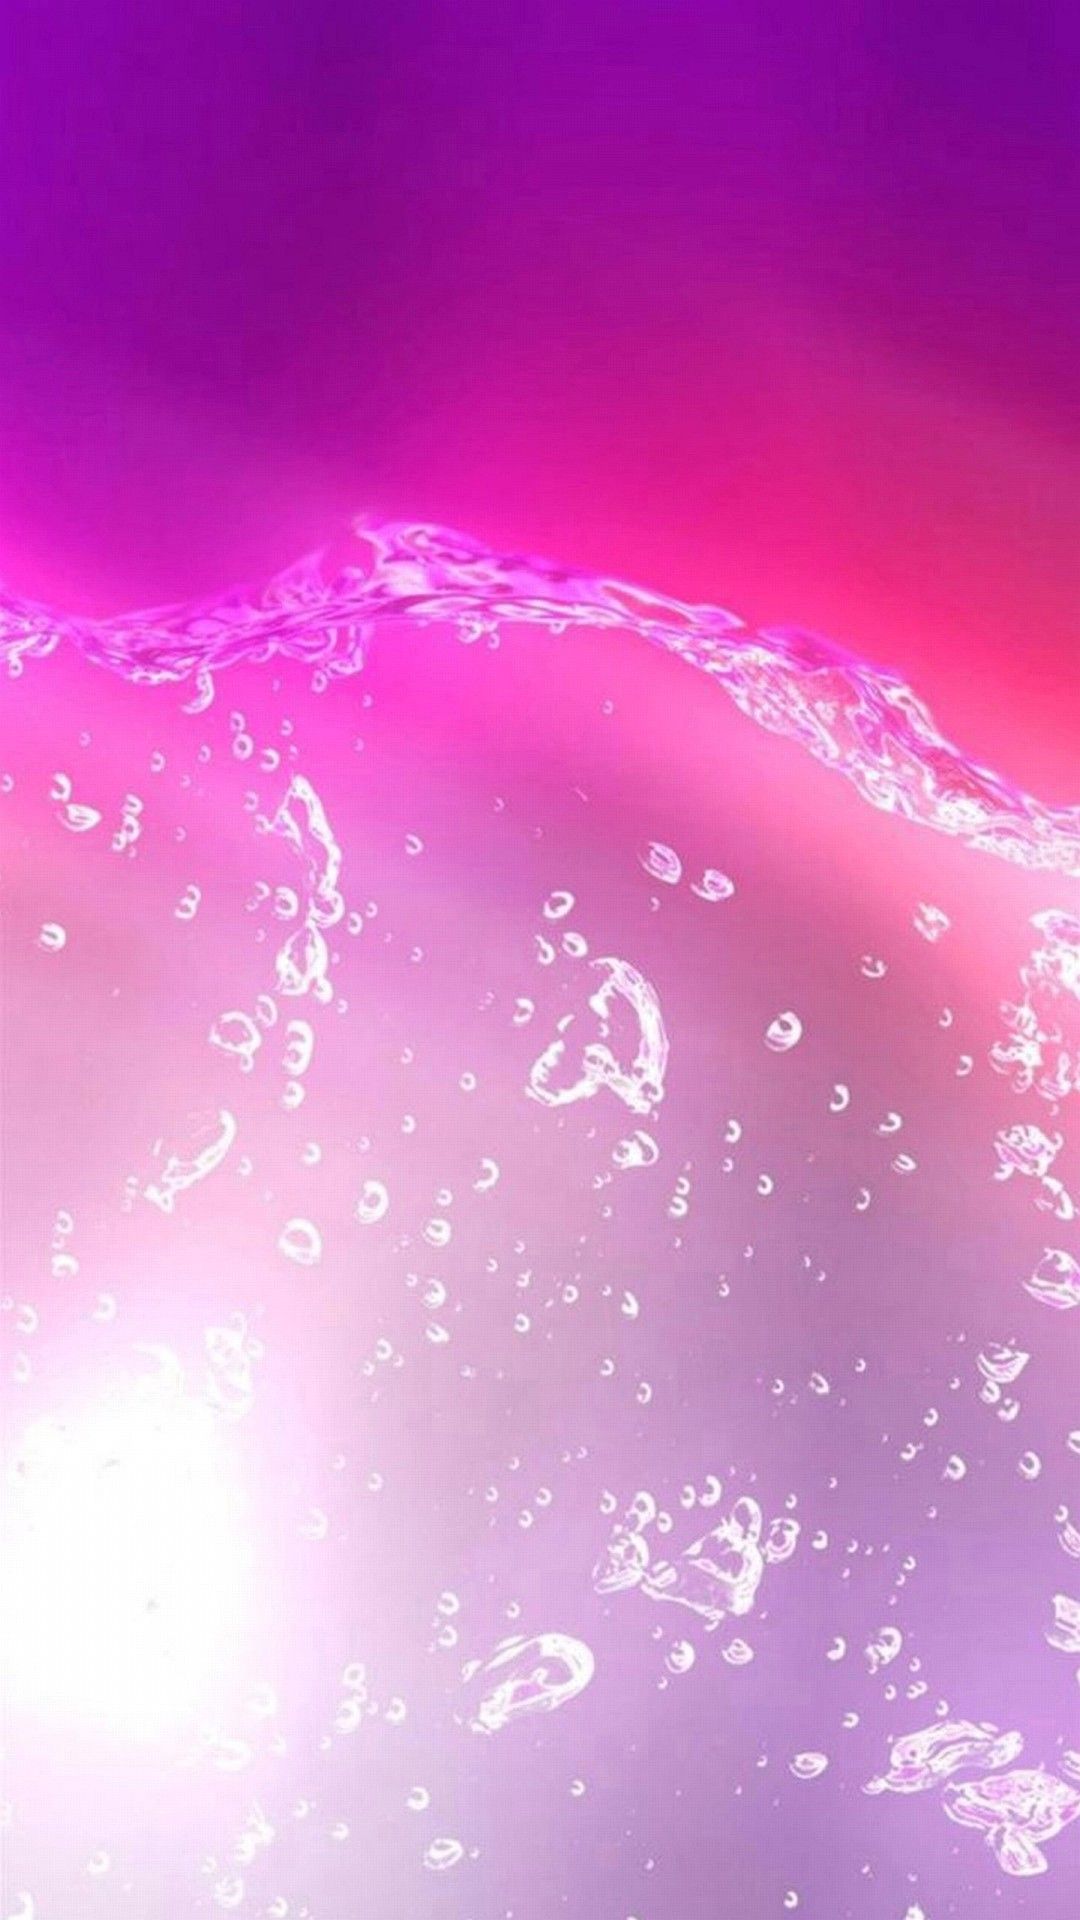 Wallpaper Iphone 6 Plus Water Pink 5 5 Inches - 1080 x 1920 ...